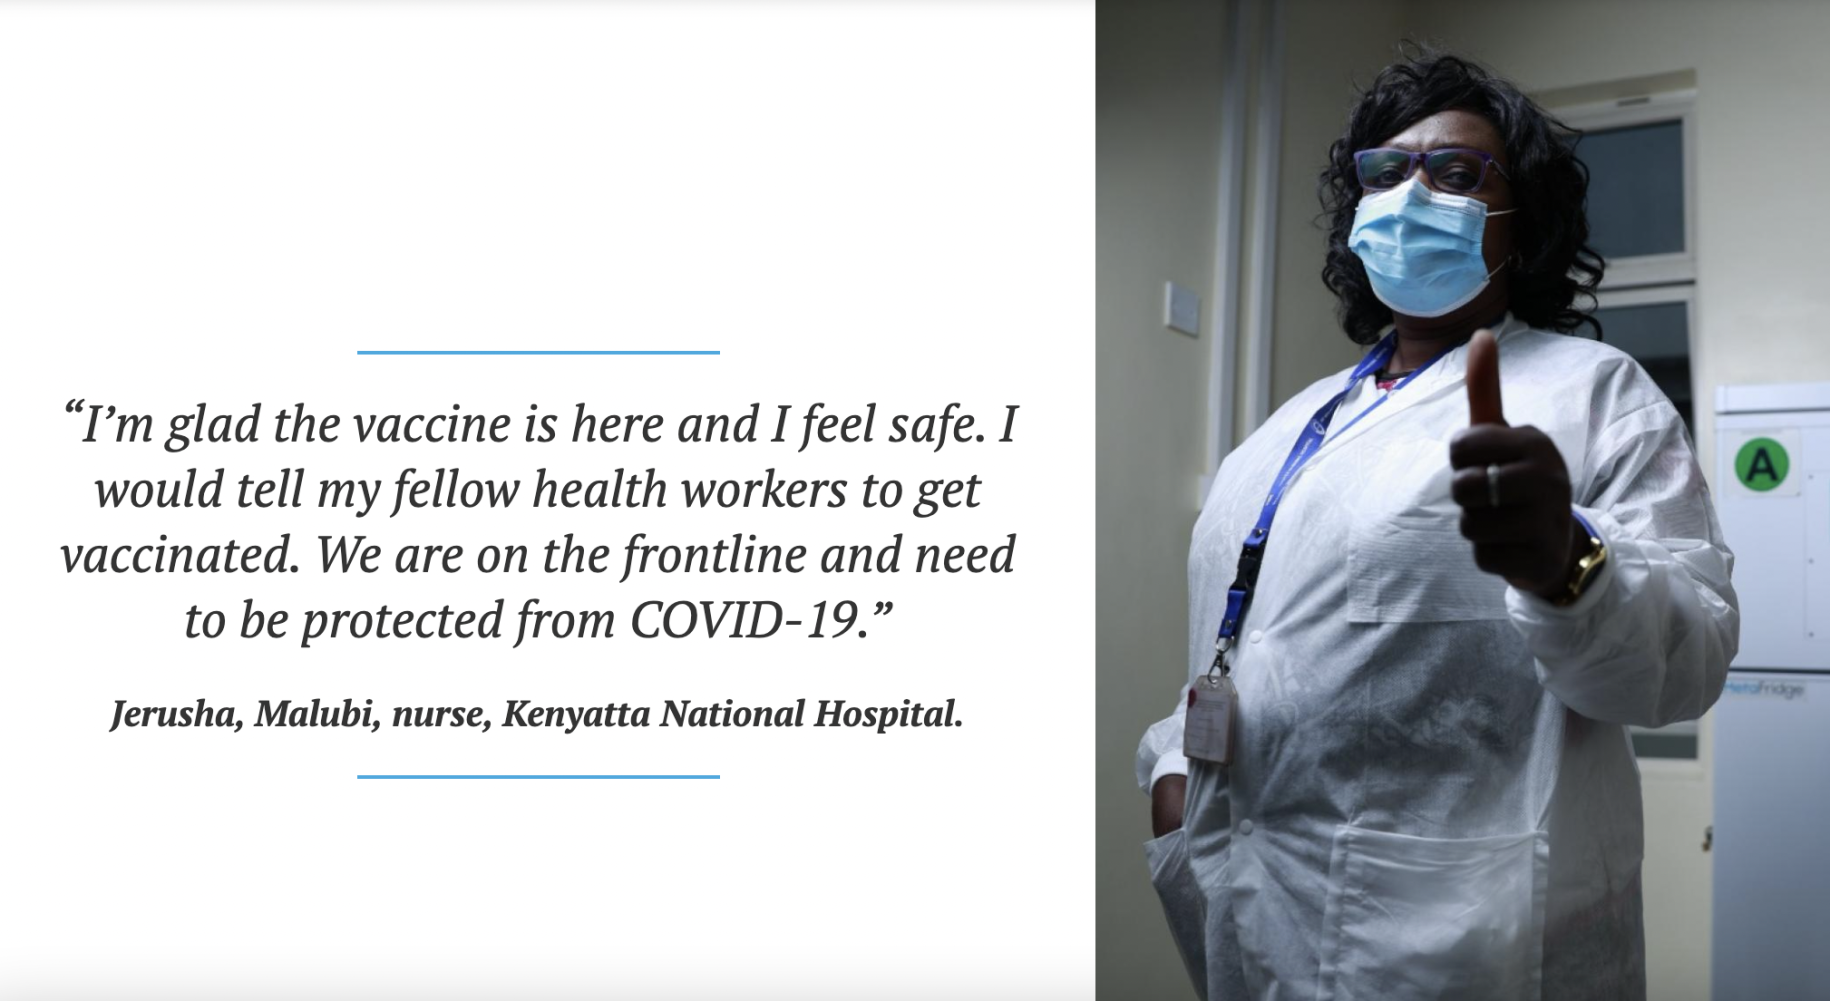 A woman in a white lab coat and blue surgical mask gives the camera thumbs up.